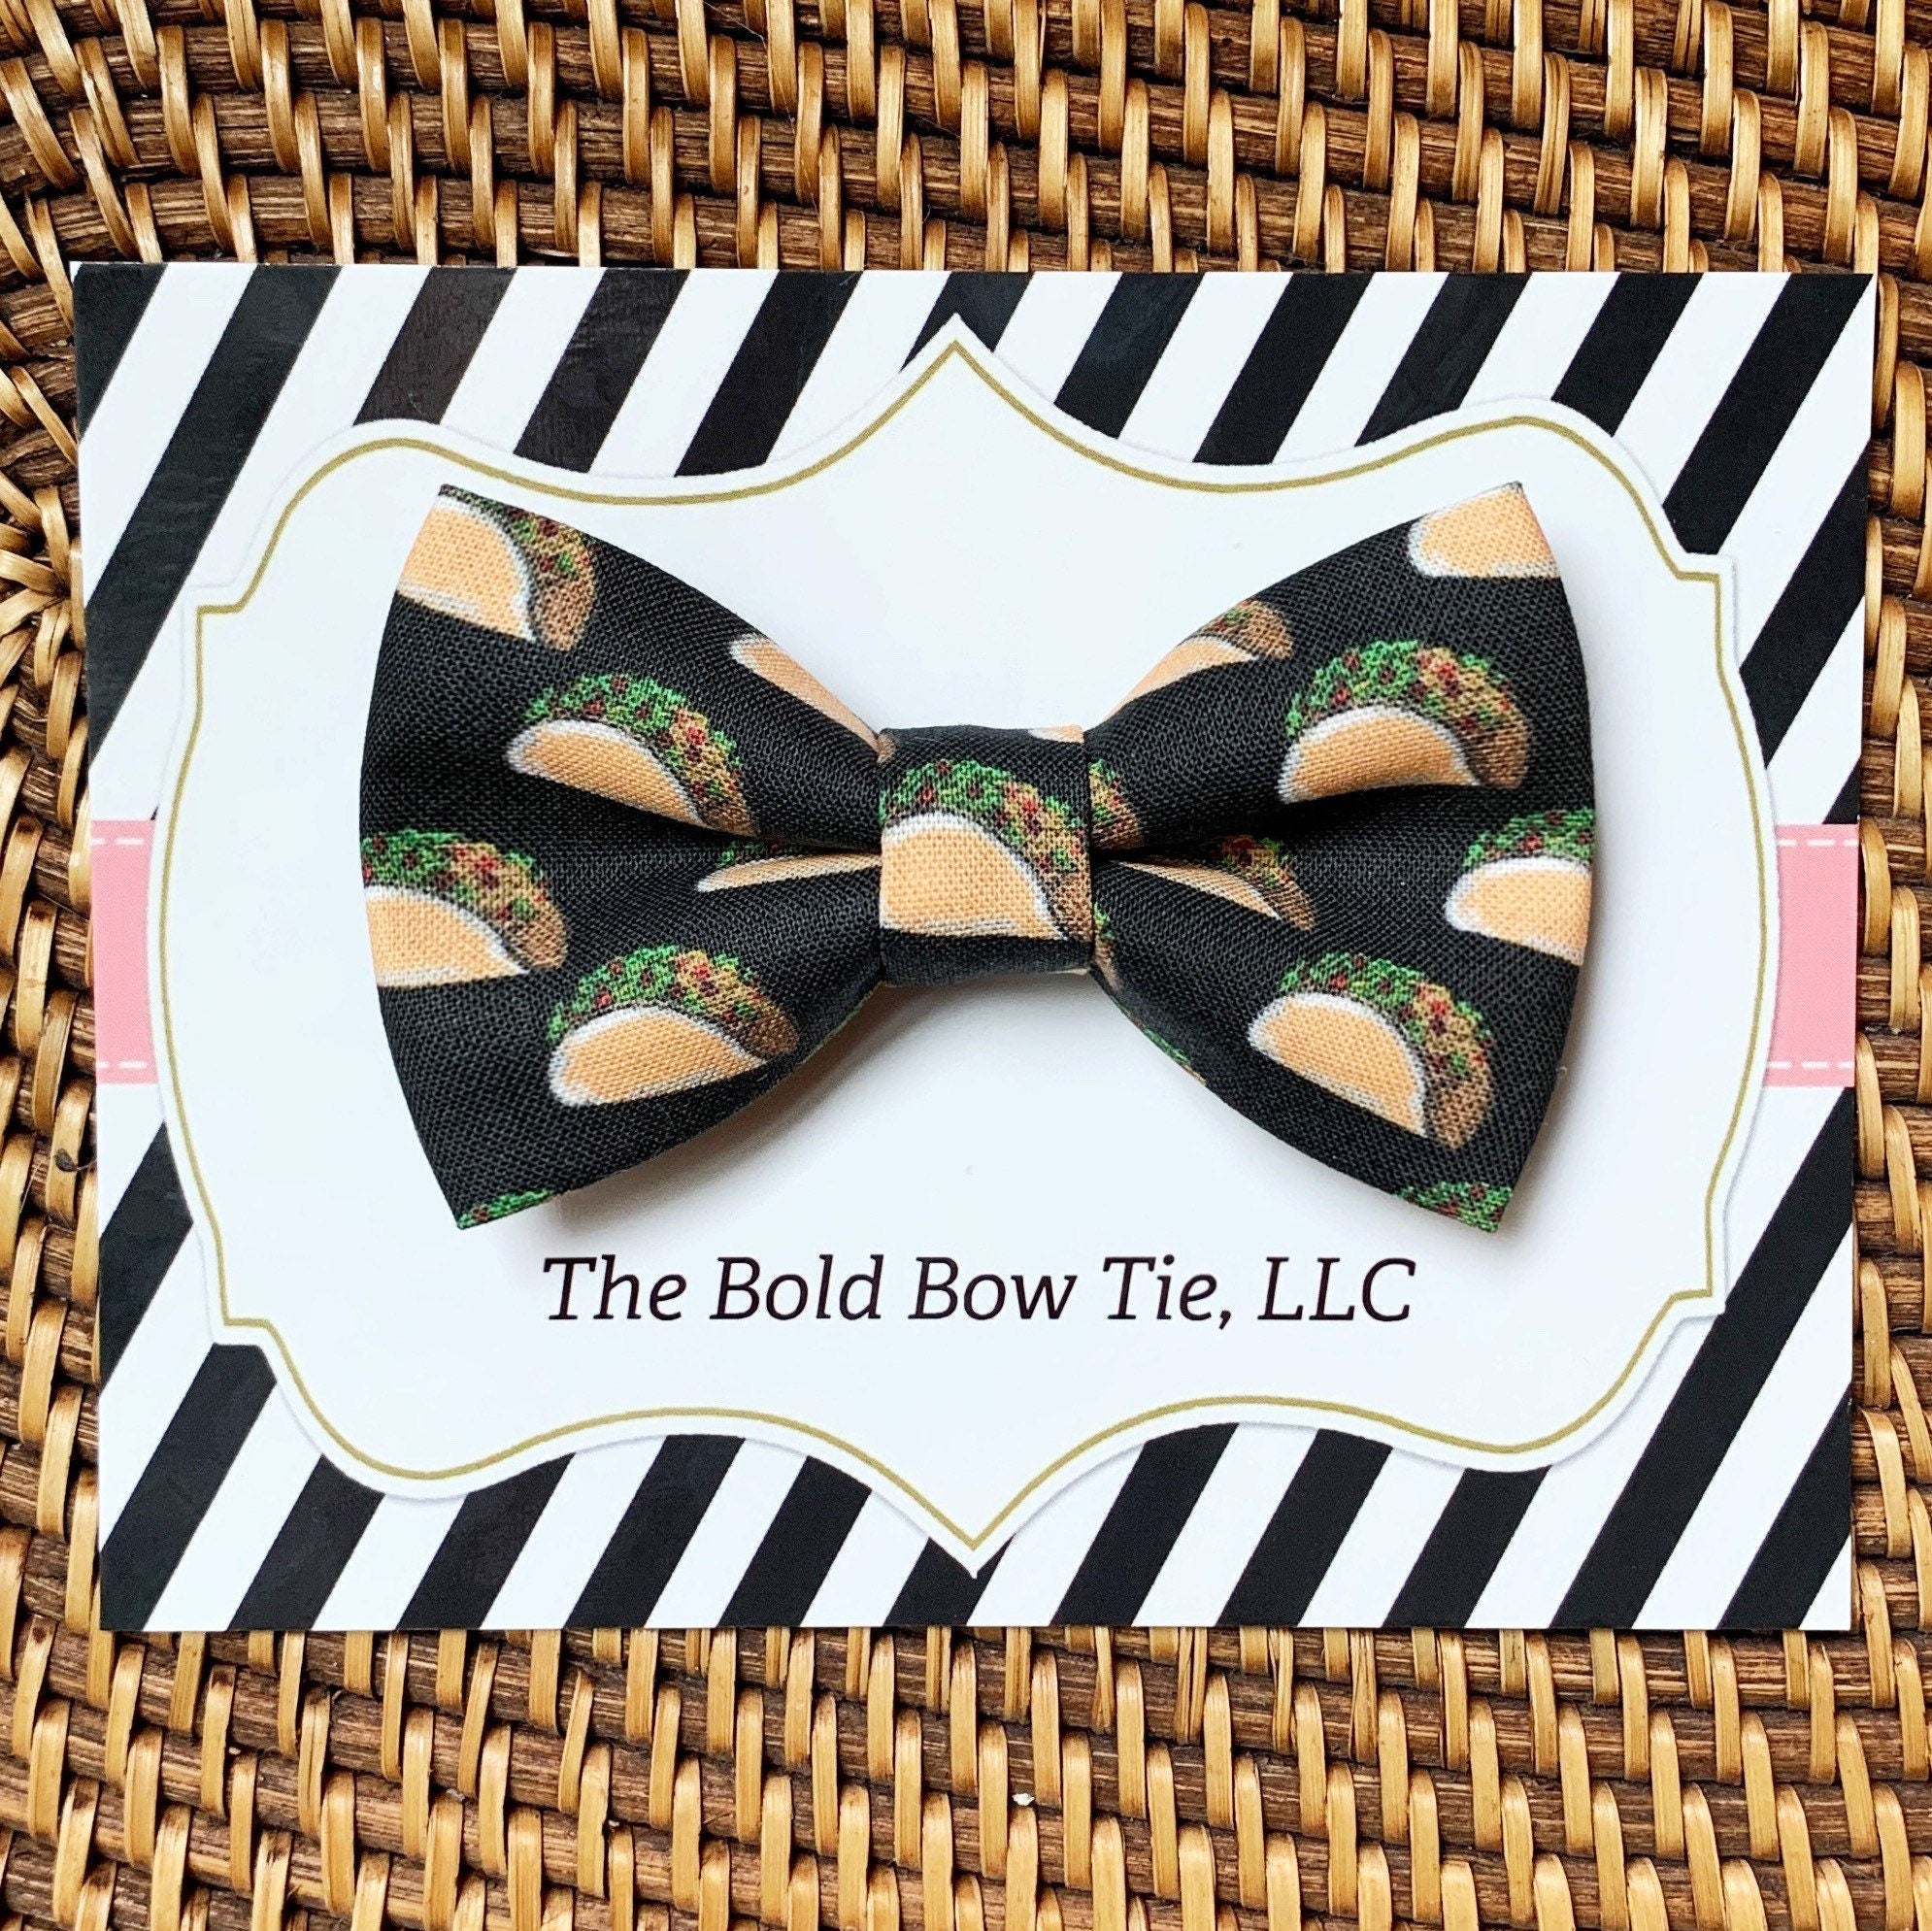 Taco Bow Tie for Dog and Cat Collar